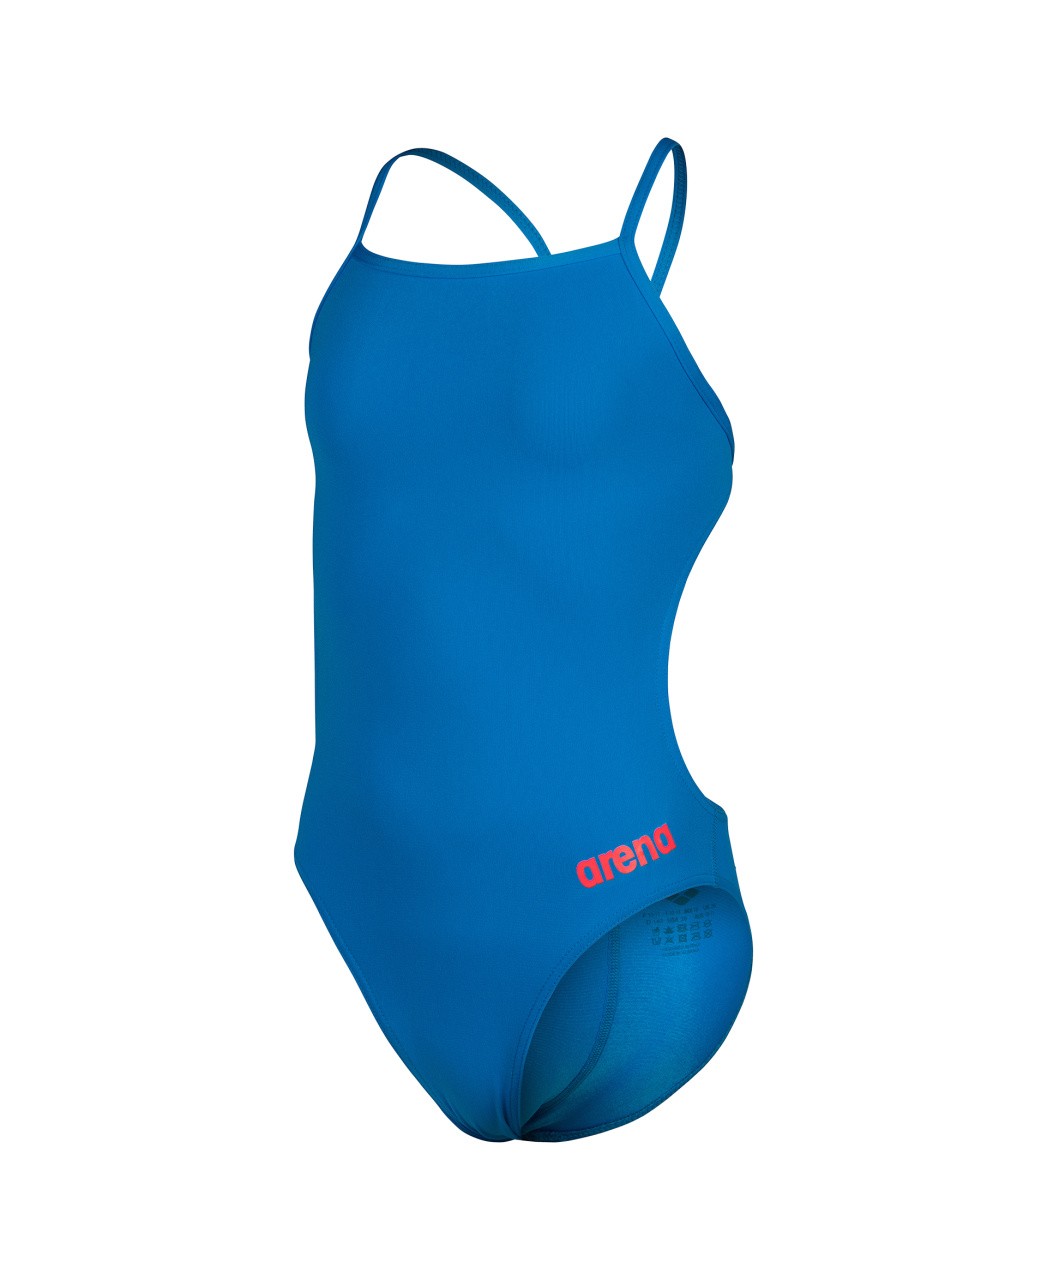 G Team Swimsuit Challenge Solid blue